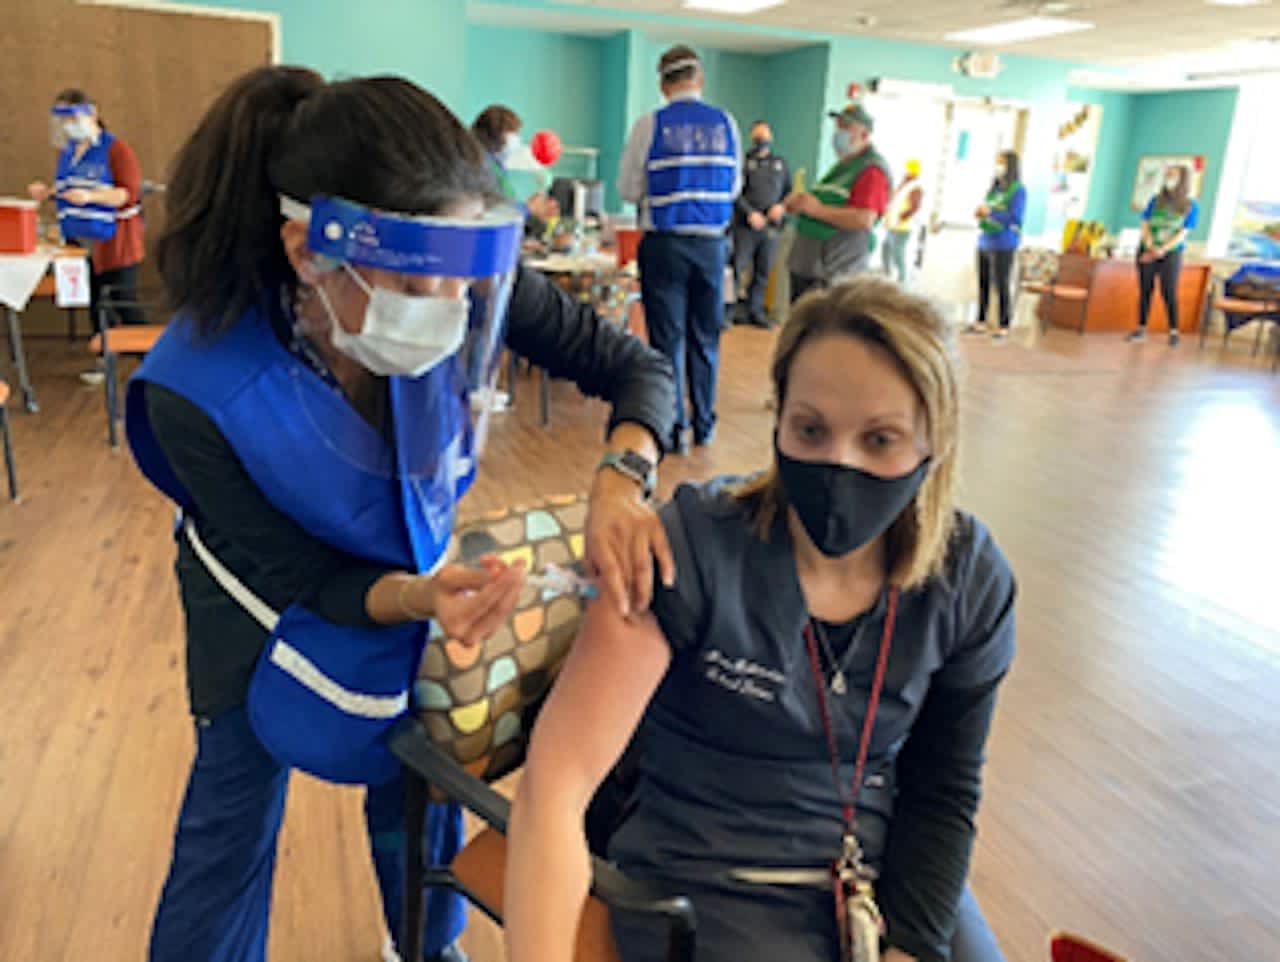 Rebecca Garcia, RN, public health nurse at the Putnam County Department of Health, administers the first dose of COVID-19 vaccine to Jennifer Mottarella, LPN, the school nurse at St. James school in the Carmel Central School District.